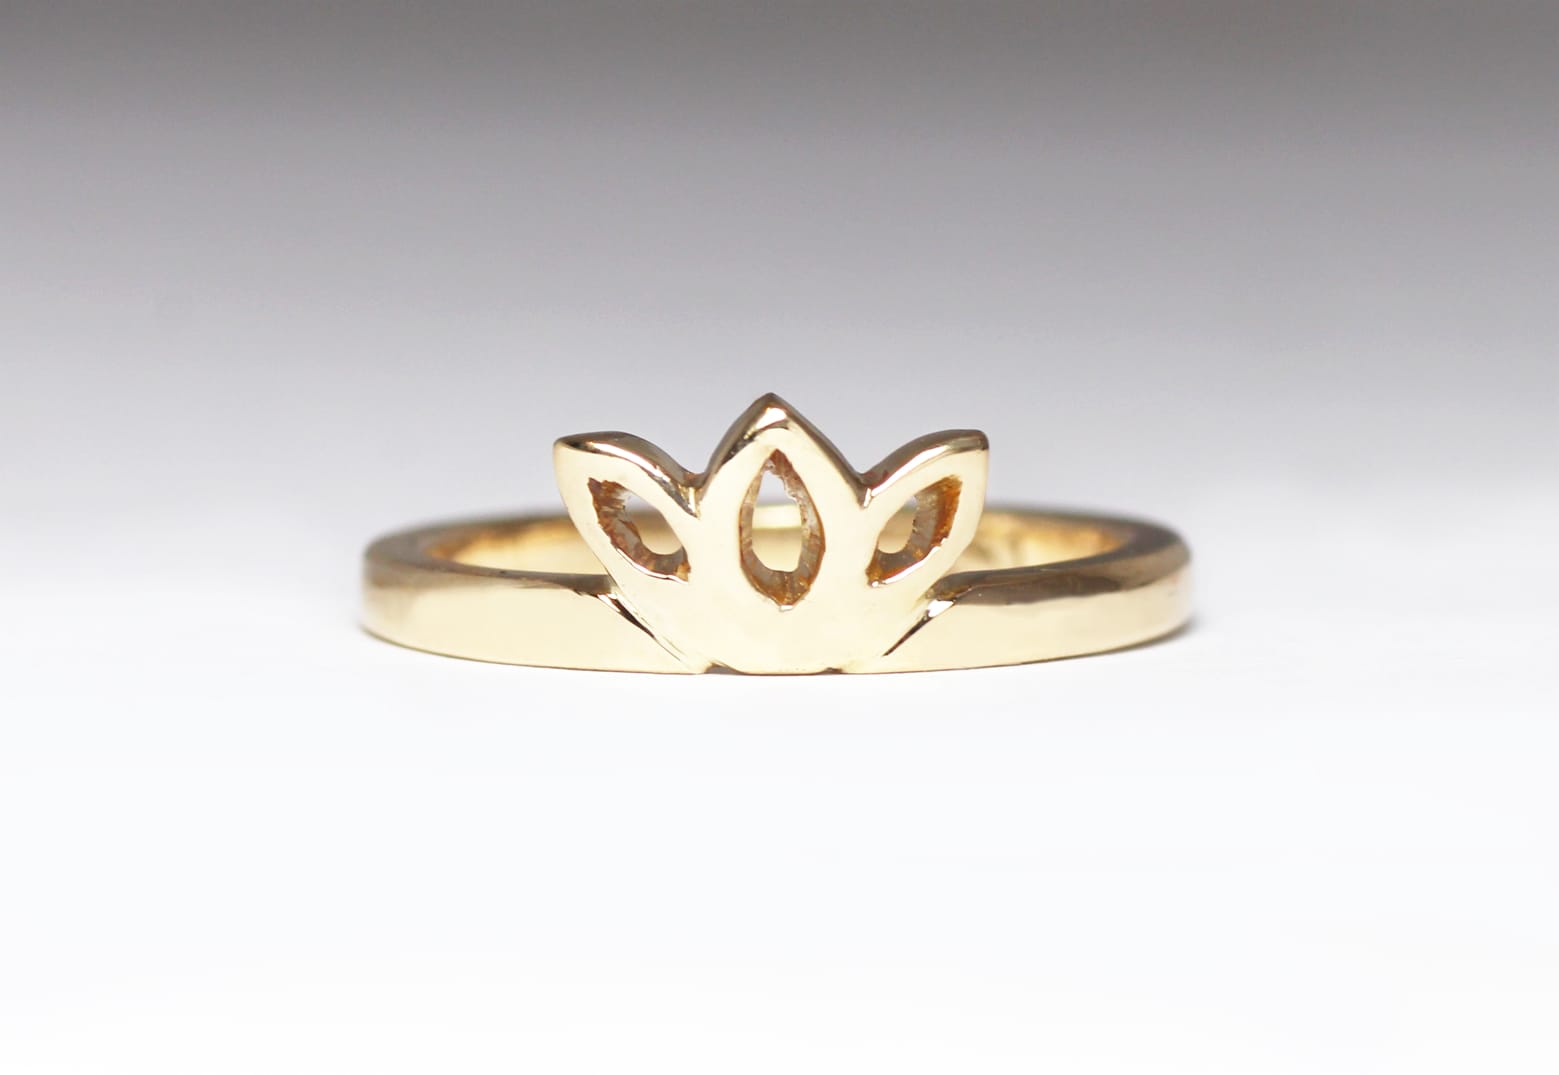 18ct Fairtrade rose gold in bespoke design by Zoe Pook Jewellery